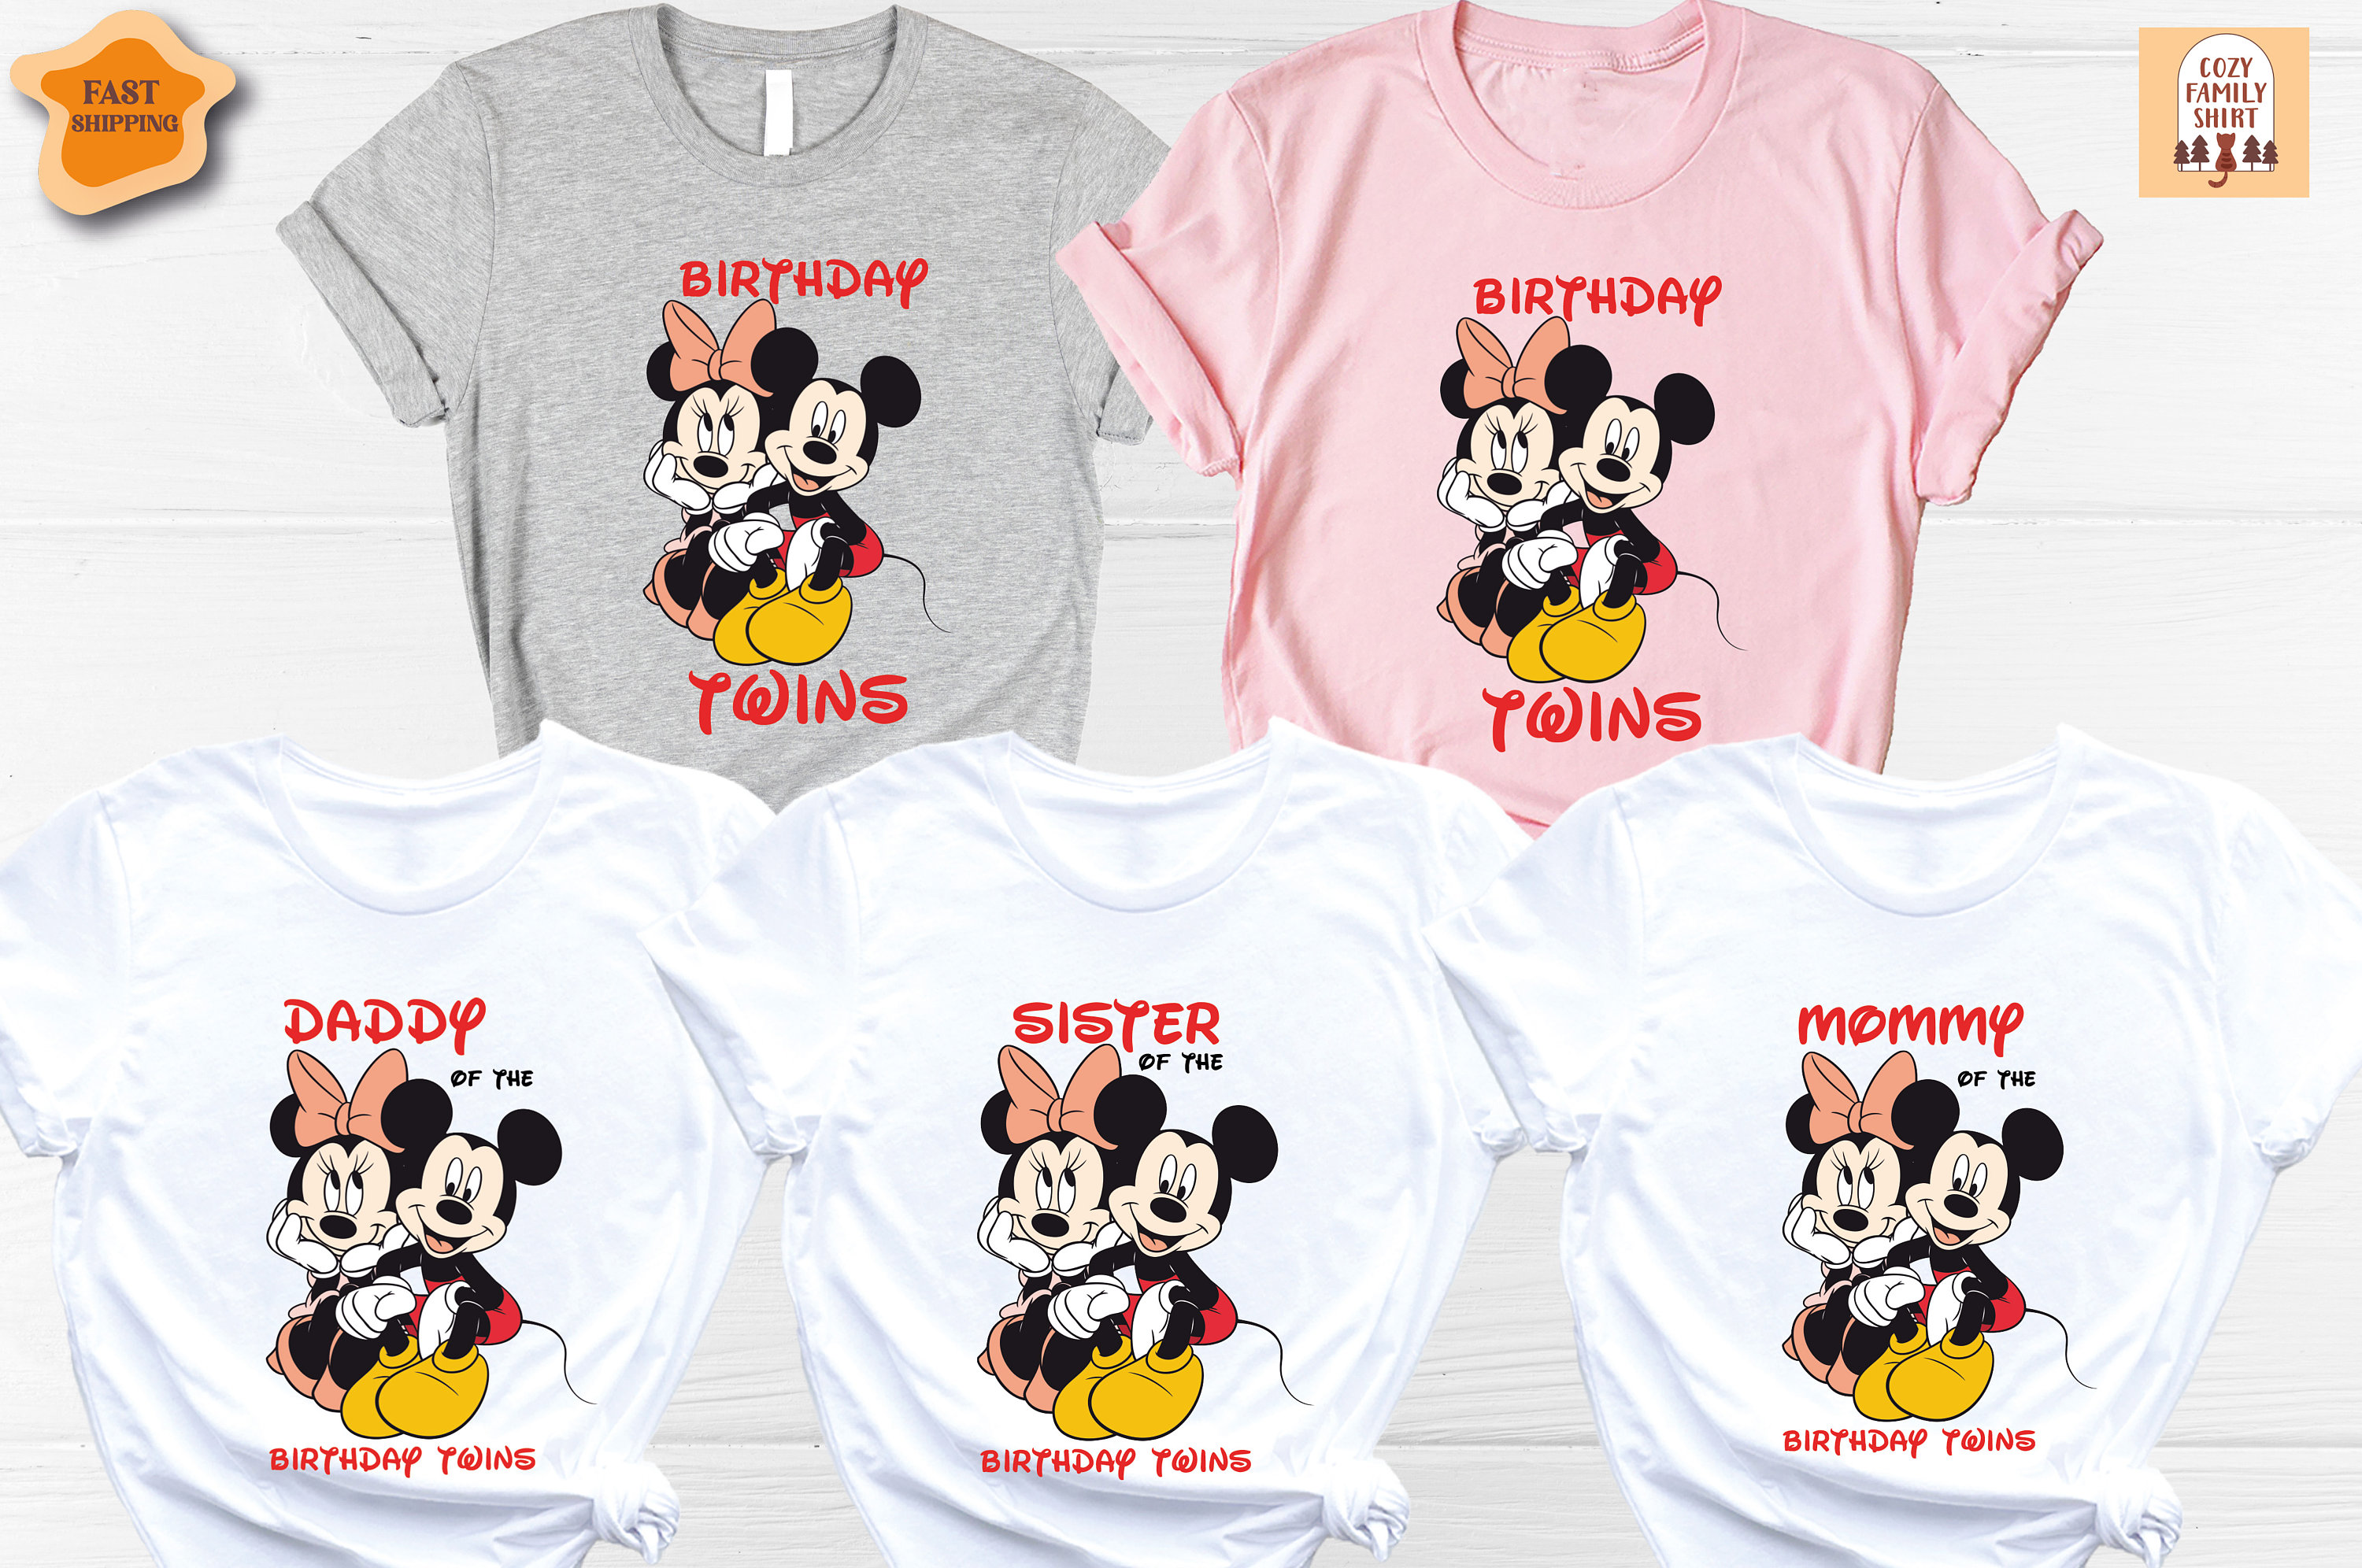 Mommy's Twin - Etsy